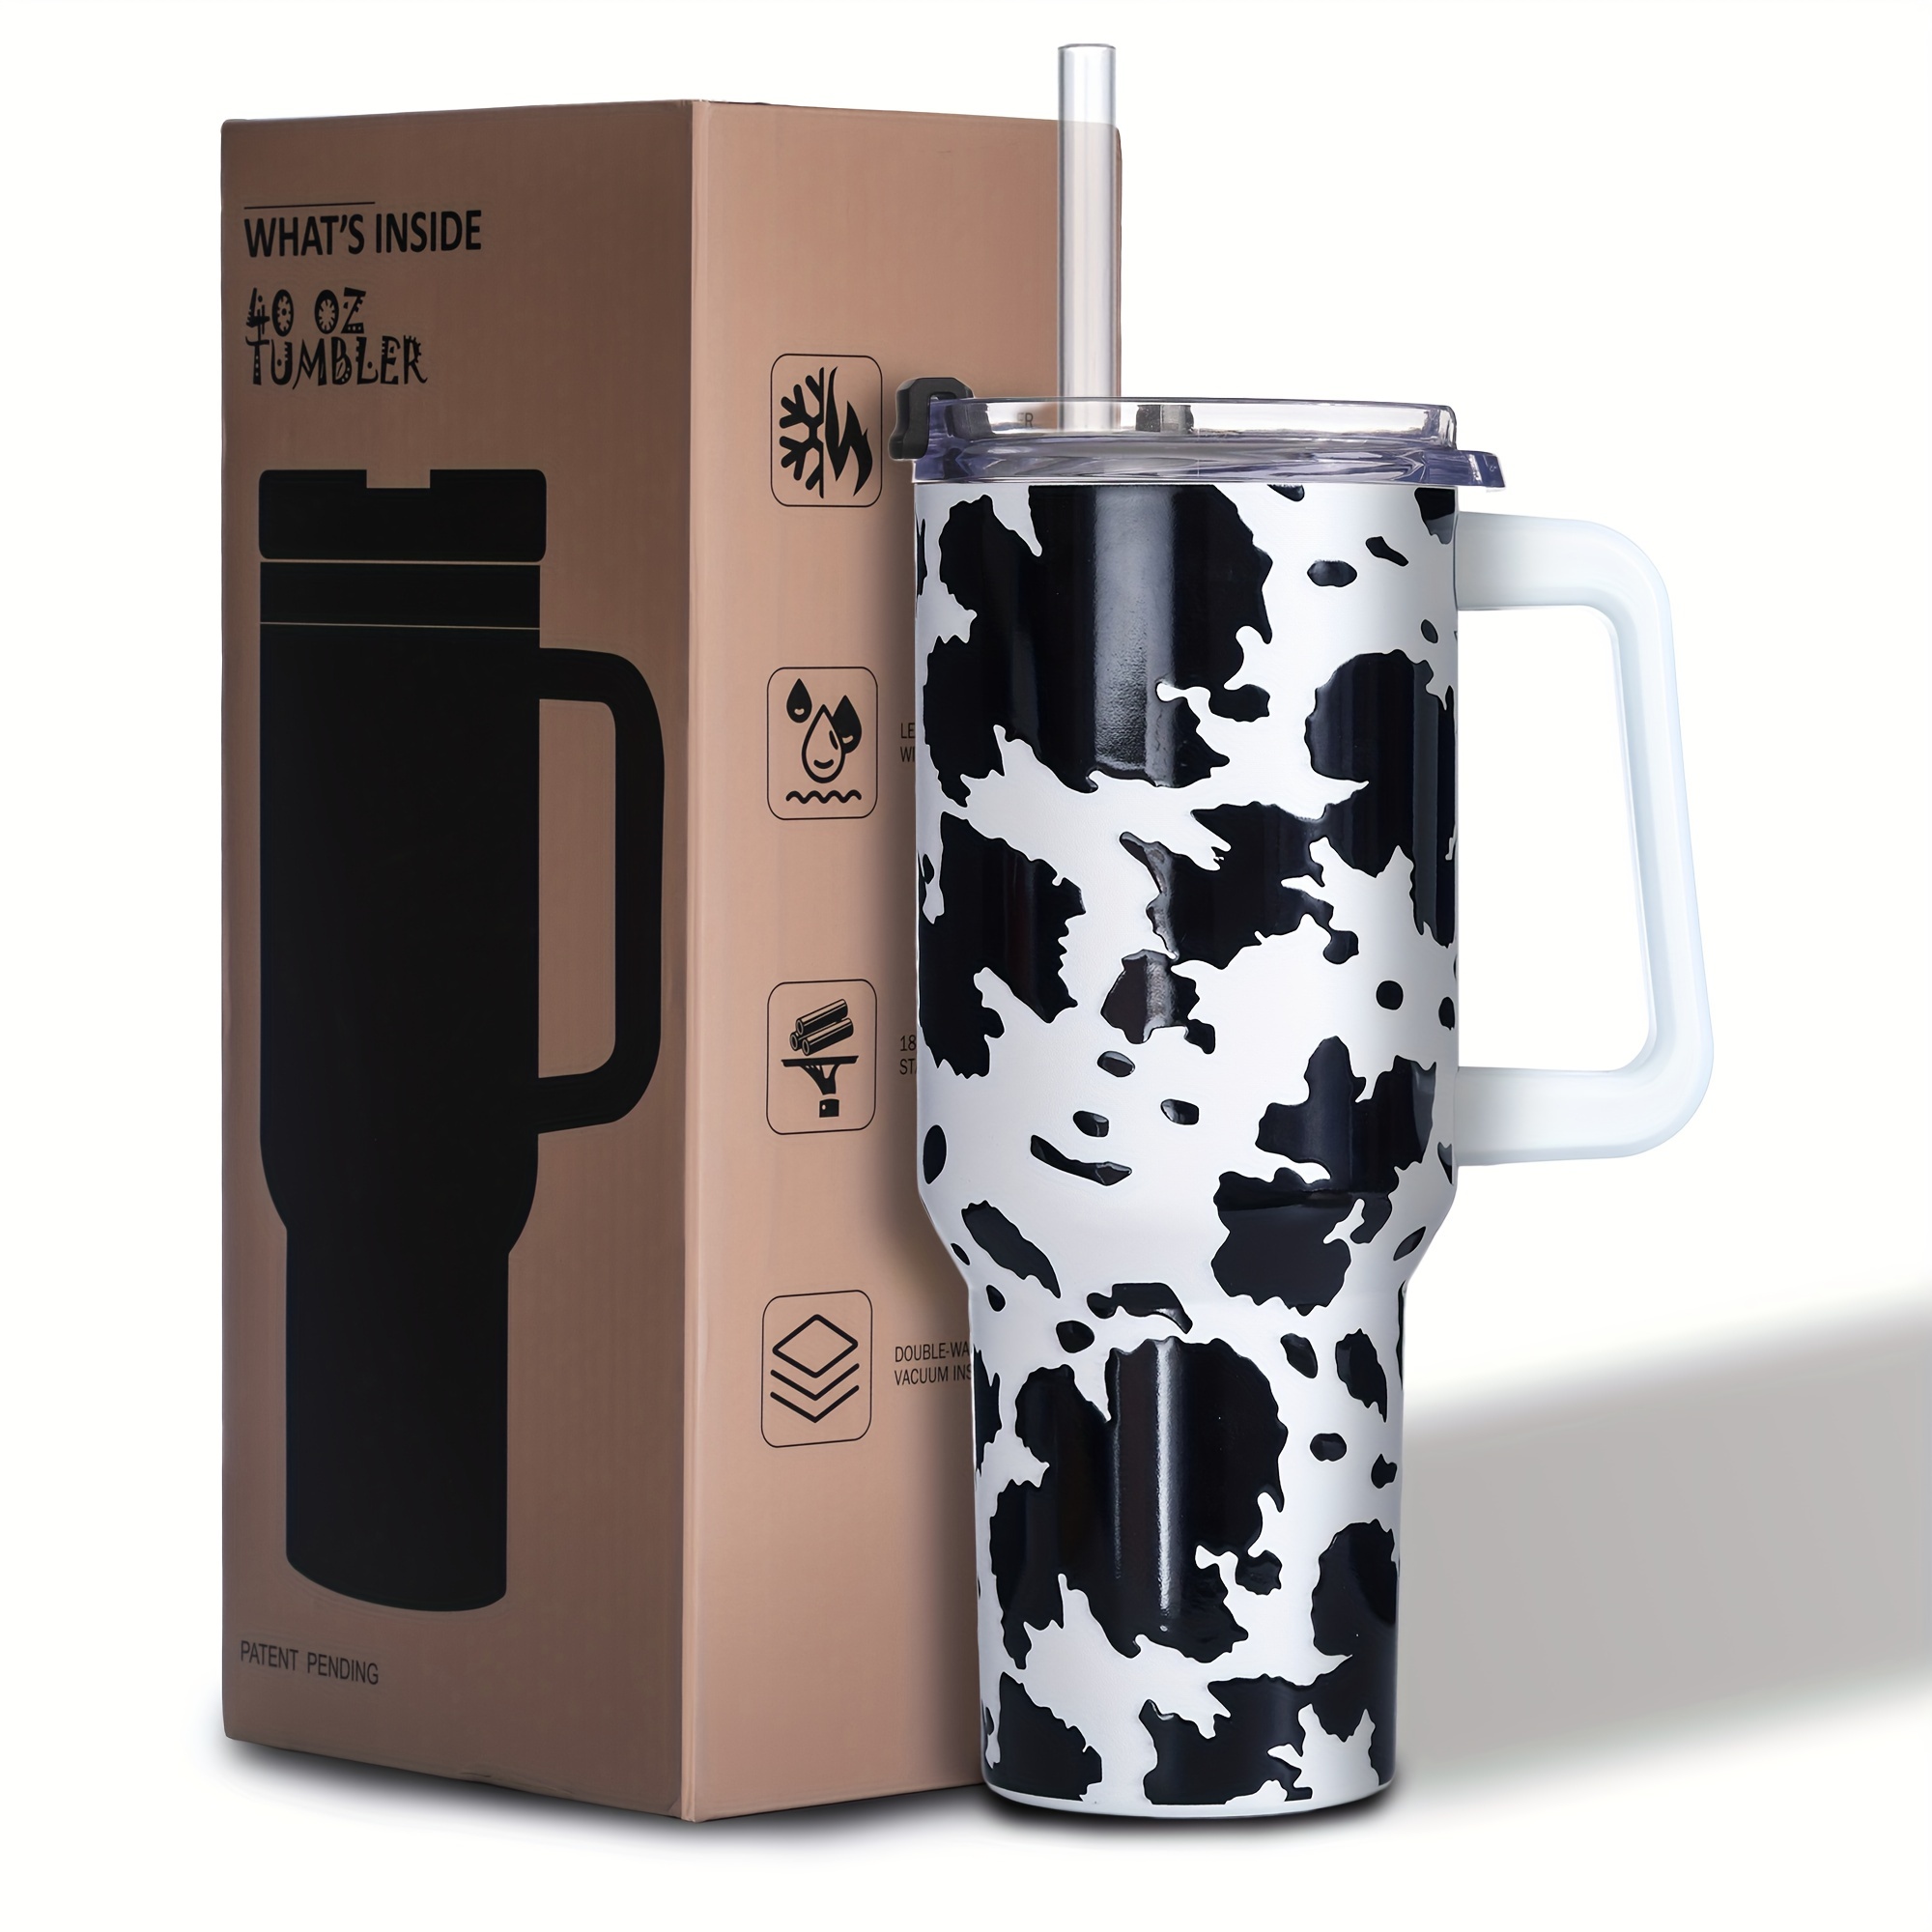 

Cow Print 40 Oz Tumbler With Handle - Stainless Steel Cup With Straw - Insulated Coffee Mug With Lid - Cow Print Birthday Gifts For Women - Hand Wash Only